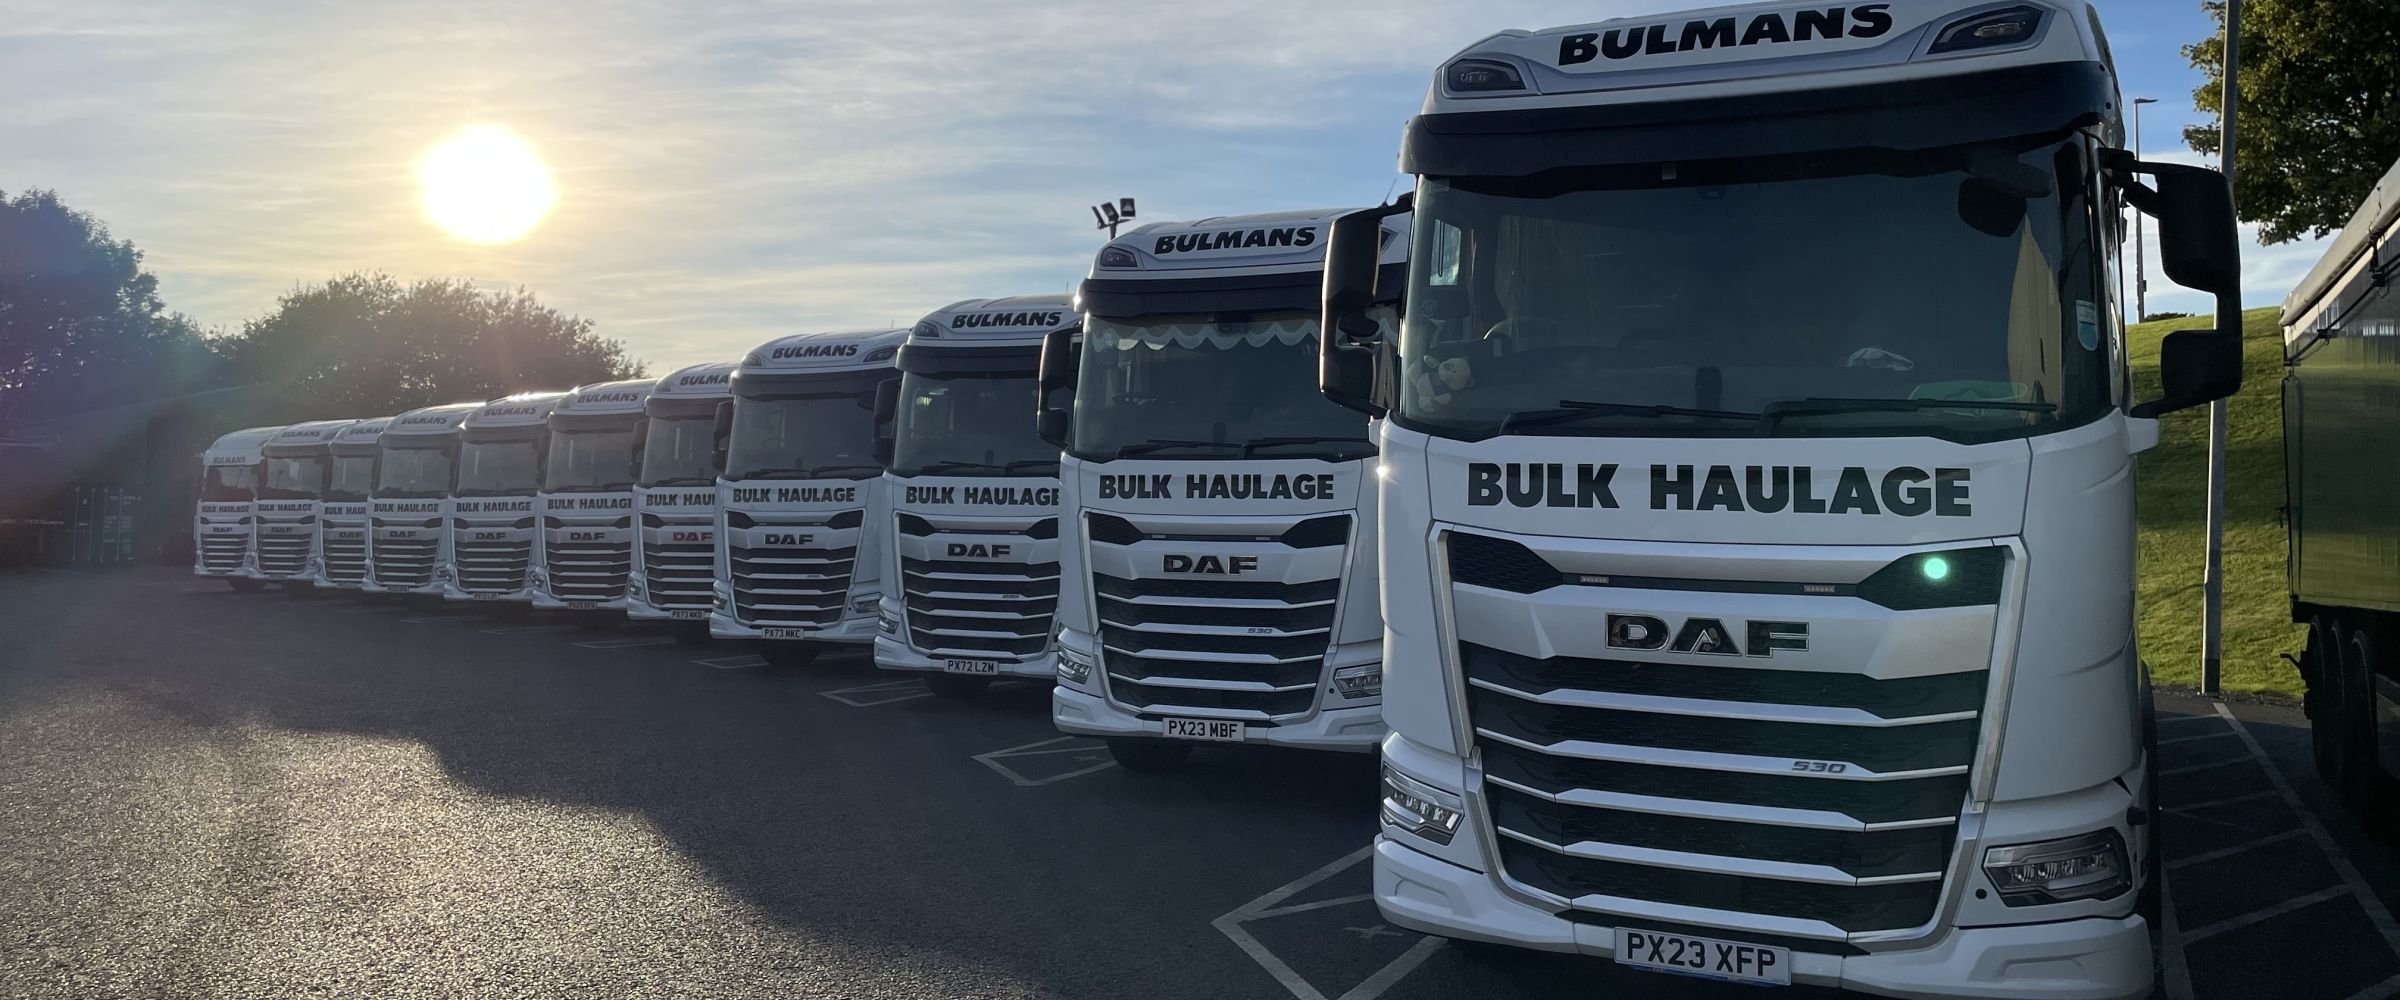 A row of Bulmans Bulk Haulage DAF white trucks parked in a line with a blue sky and setting sun above.